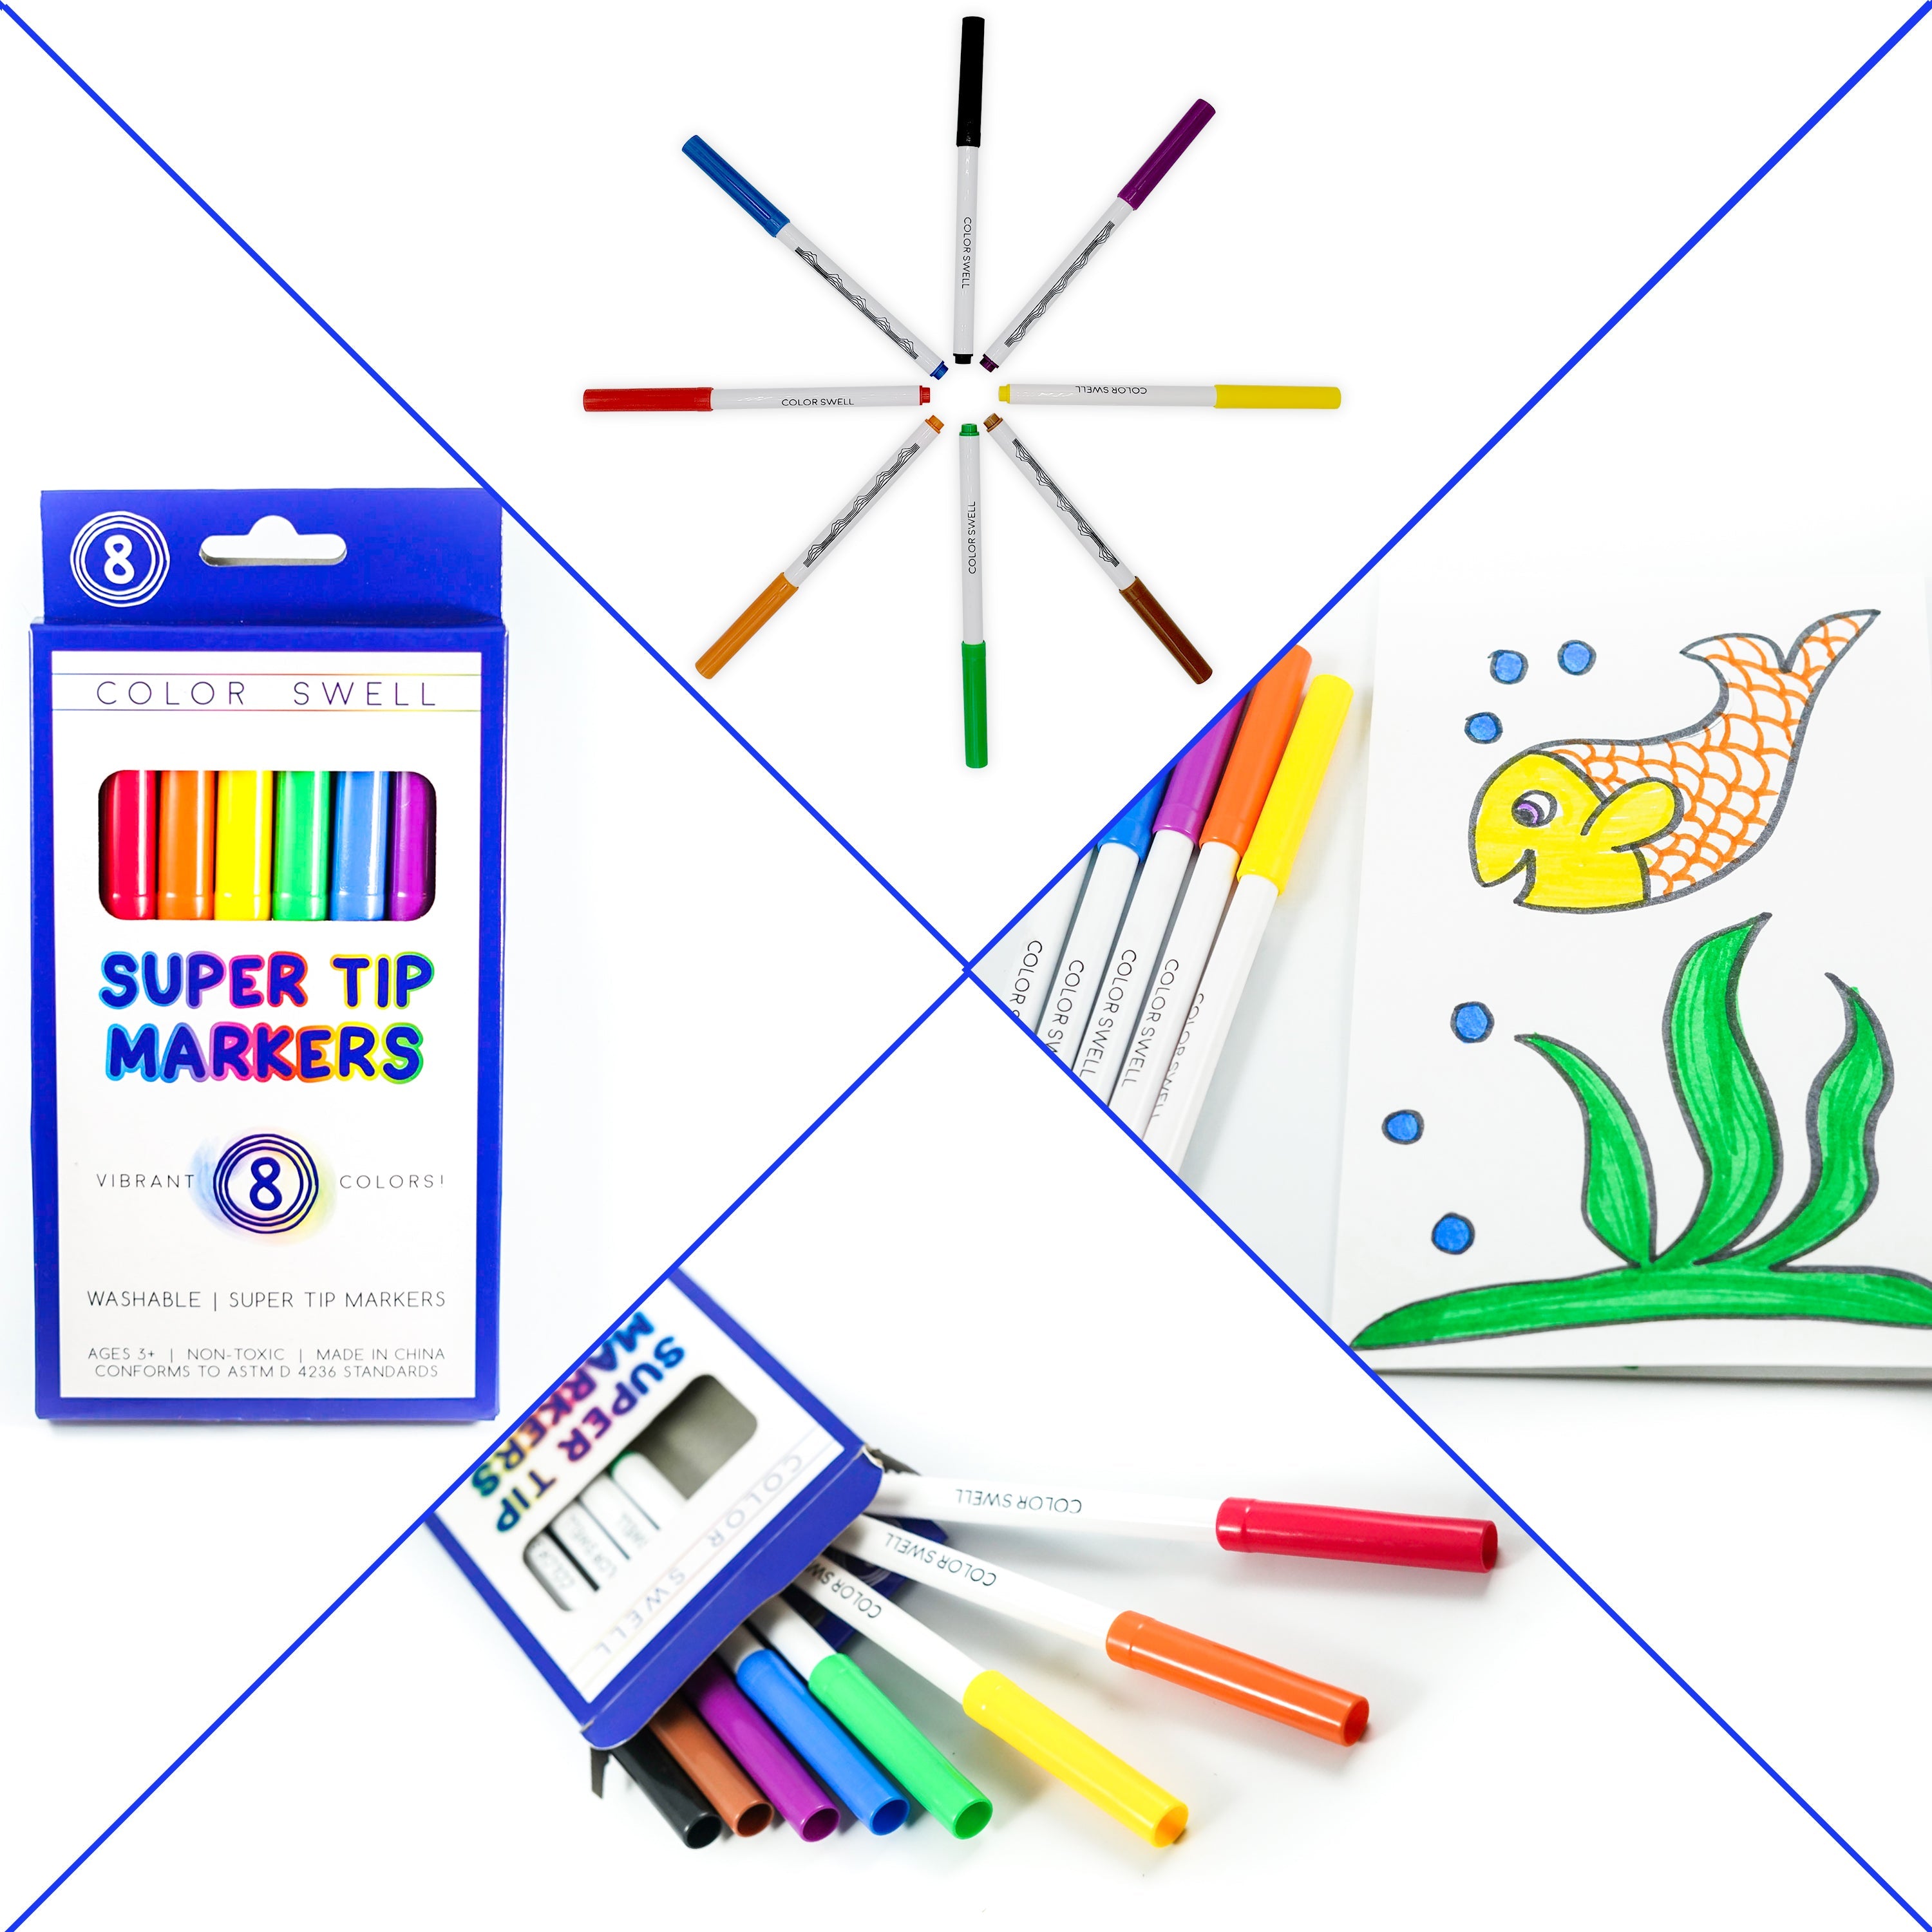 Color Swell Super Tip Washable Markers Bulk Pack 50 Boxes of 8 Vibrant Colors (400 Total) Color Swell